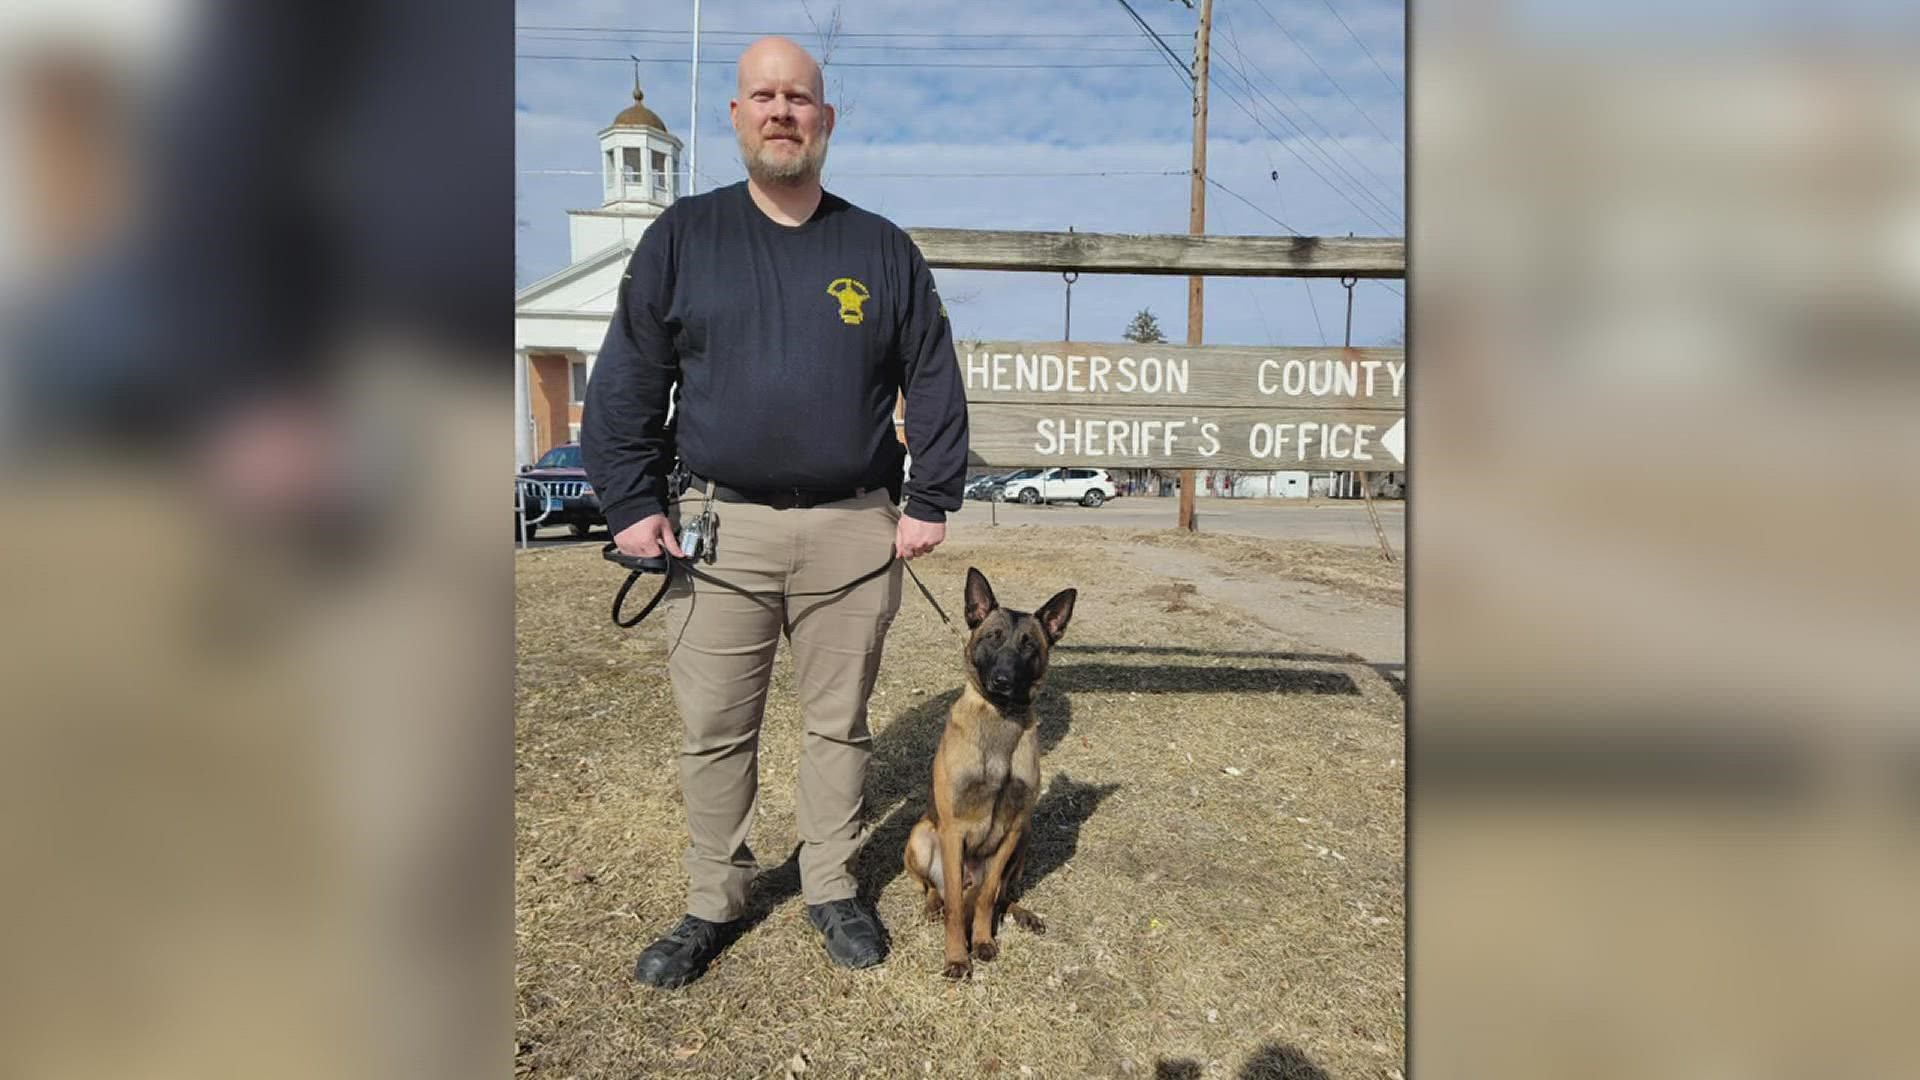 Montana, a 1.5-year-old Belgian Malinois, is in the process of completing her 10-week K9 training.